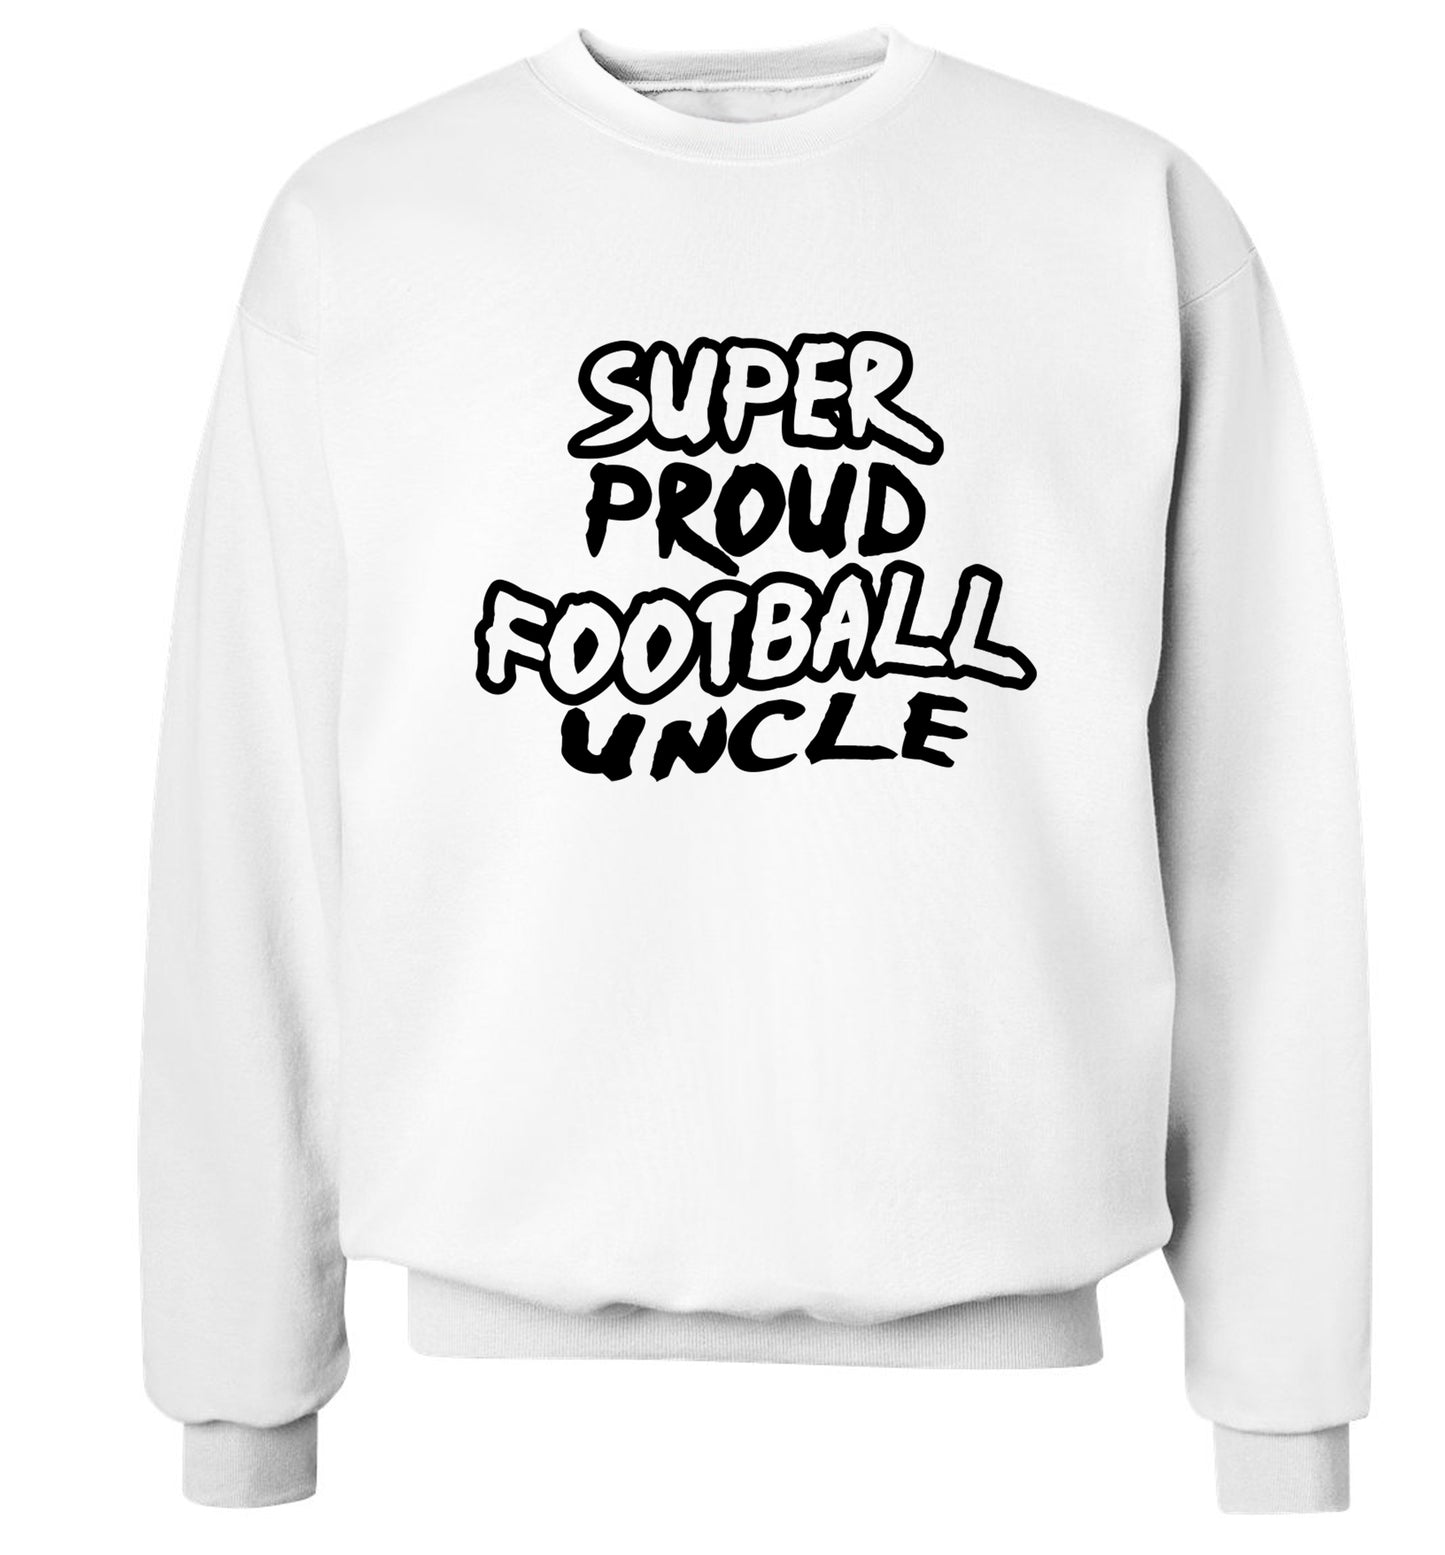 Super proud football uncle Adult's unisexwhite Sweater 2XL